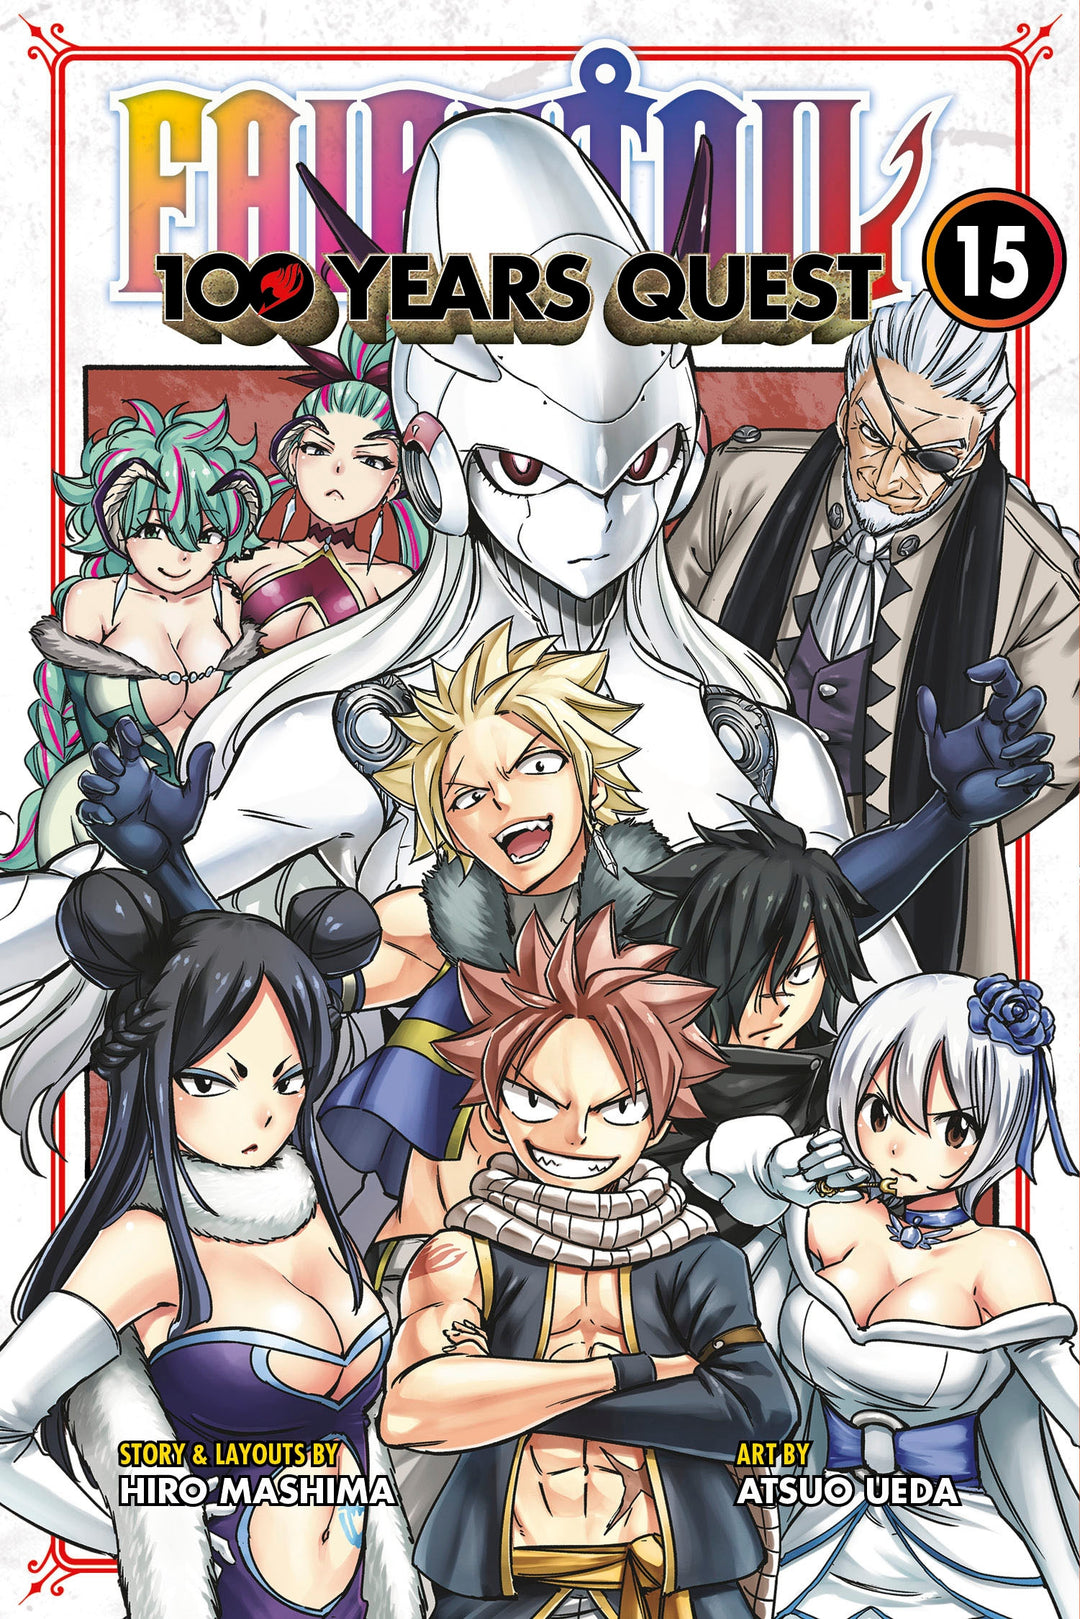 Fairy Tail: 100 Years Quest, Vol. 15